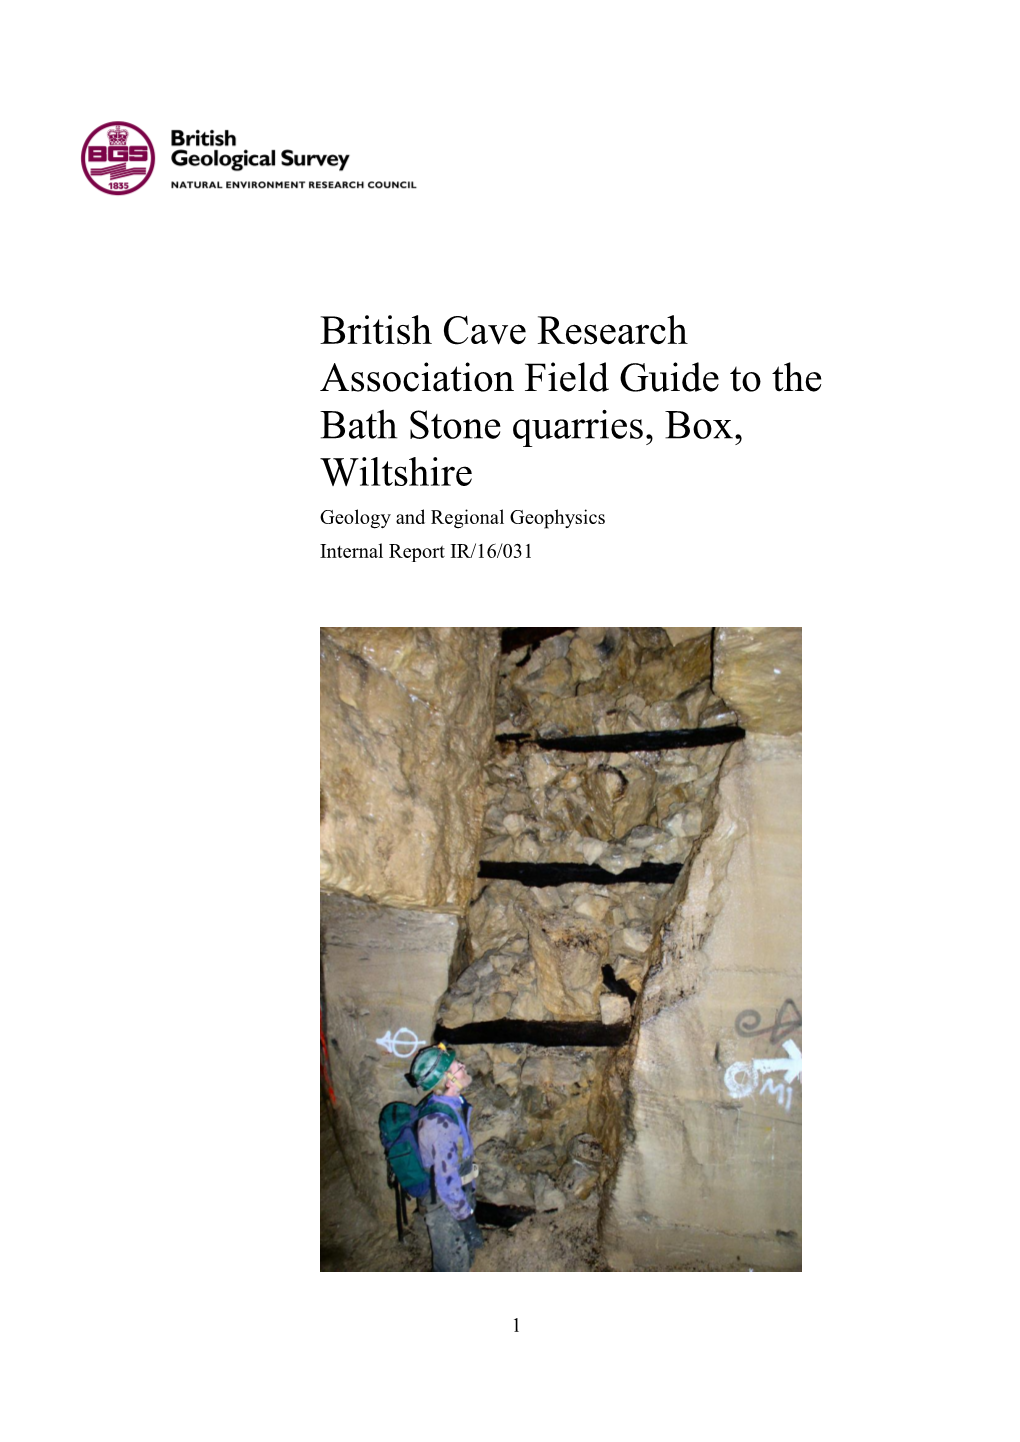 British Cave Research Association Field Guide to the Bath Stone Quarries, Box, Wiltshire Geology and Regional Geophysics Internal Report IR/16/031